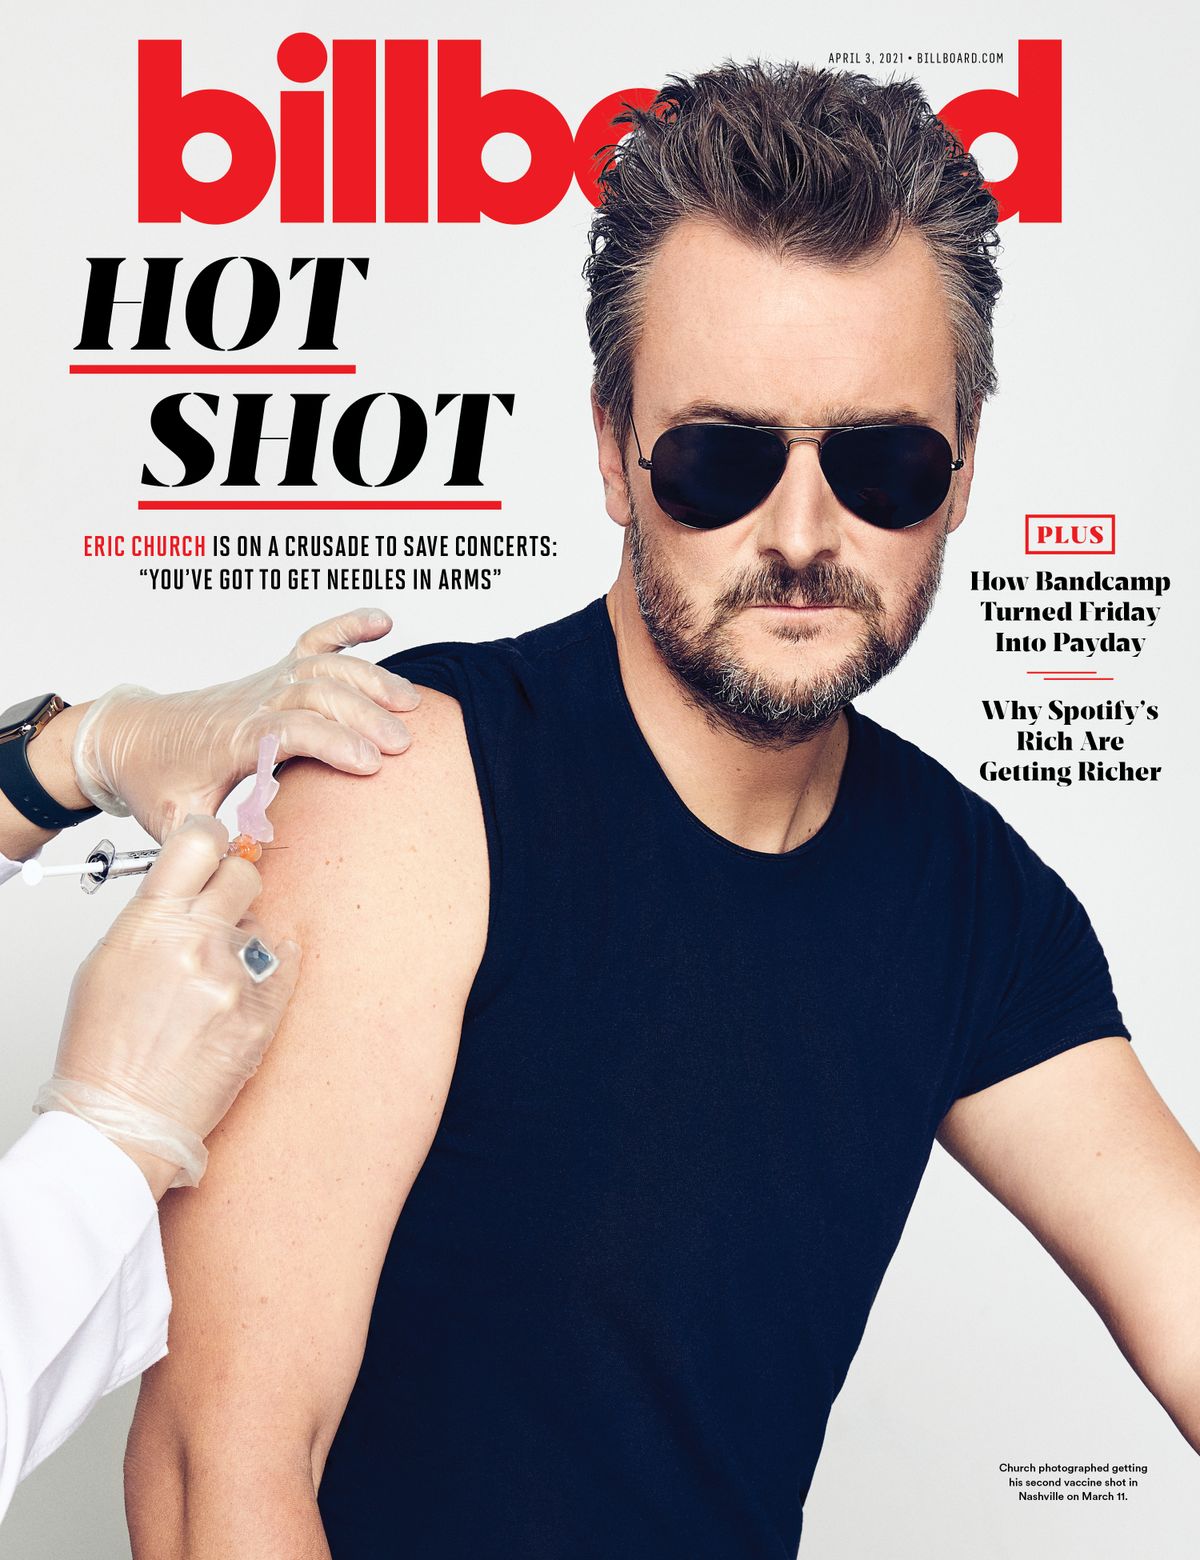 Eric Church graces the cover of Billboard in the April 3, 2021, issue.  (Robby Klein for Billboard)